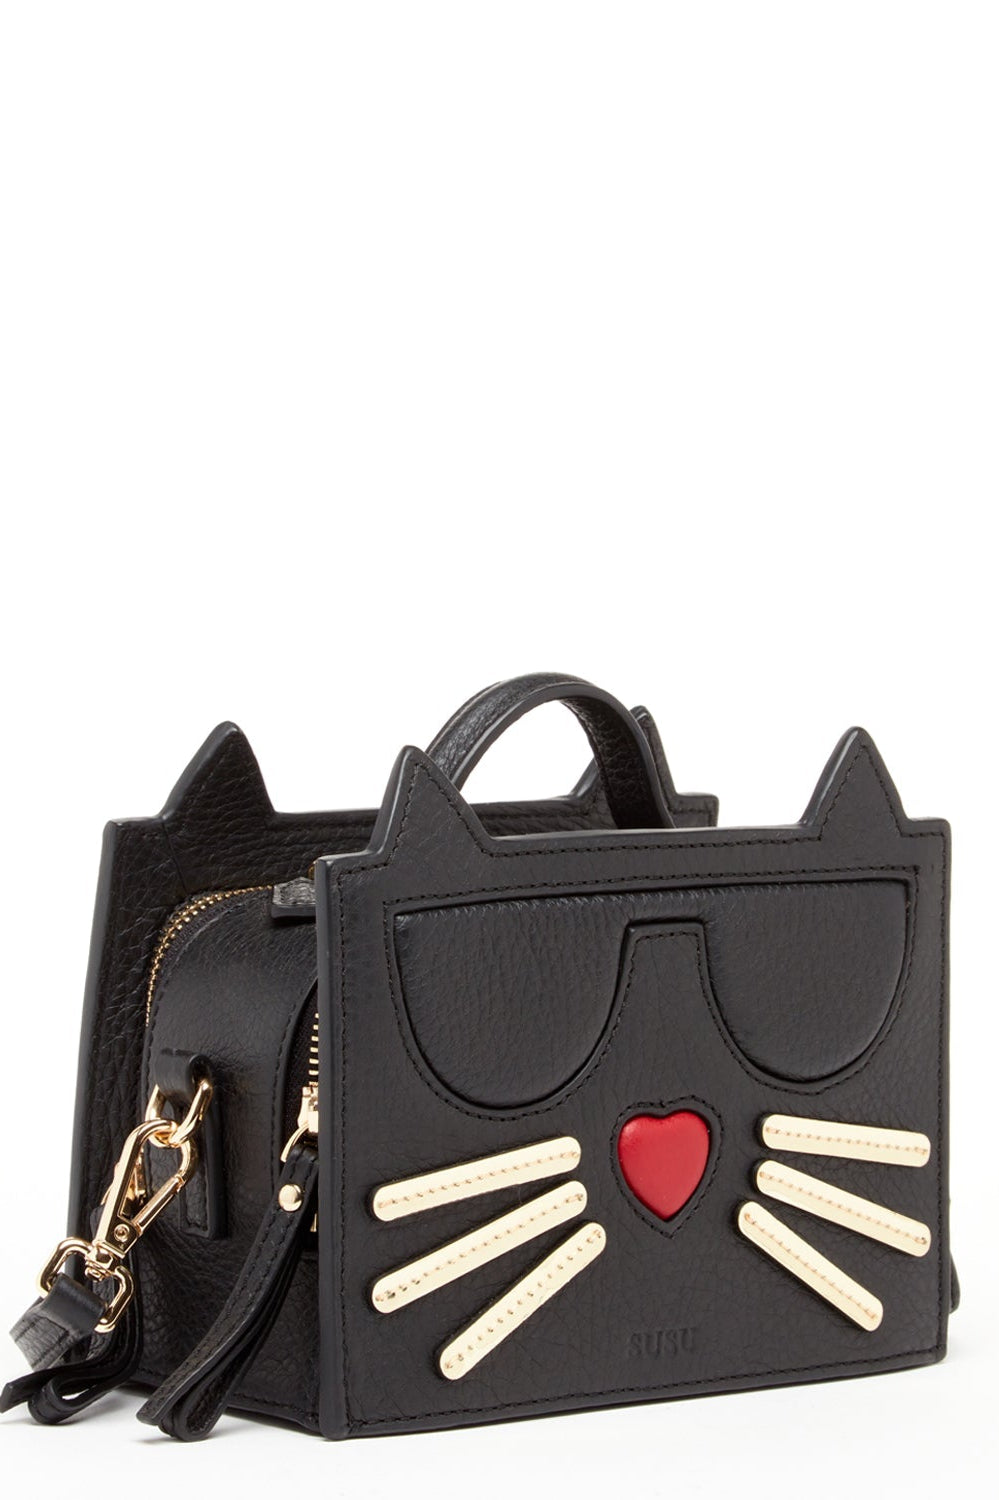 Black Genuine Leather Cat Crossbody Bag The Groovalution